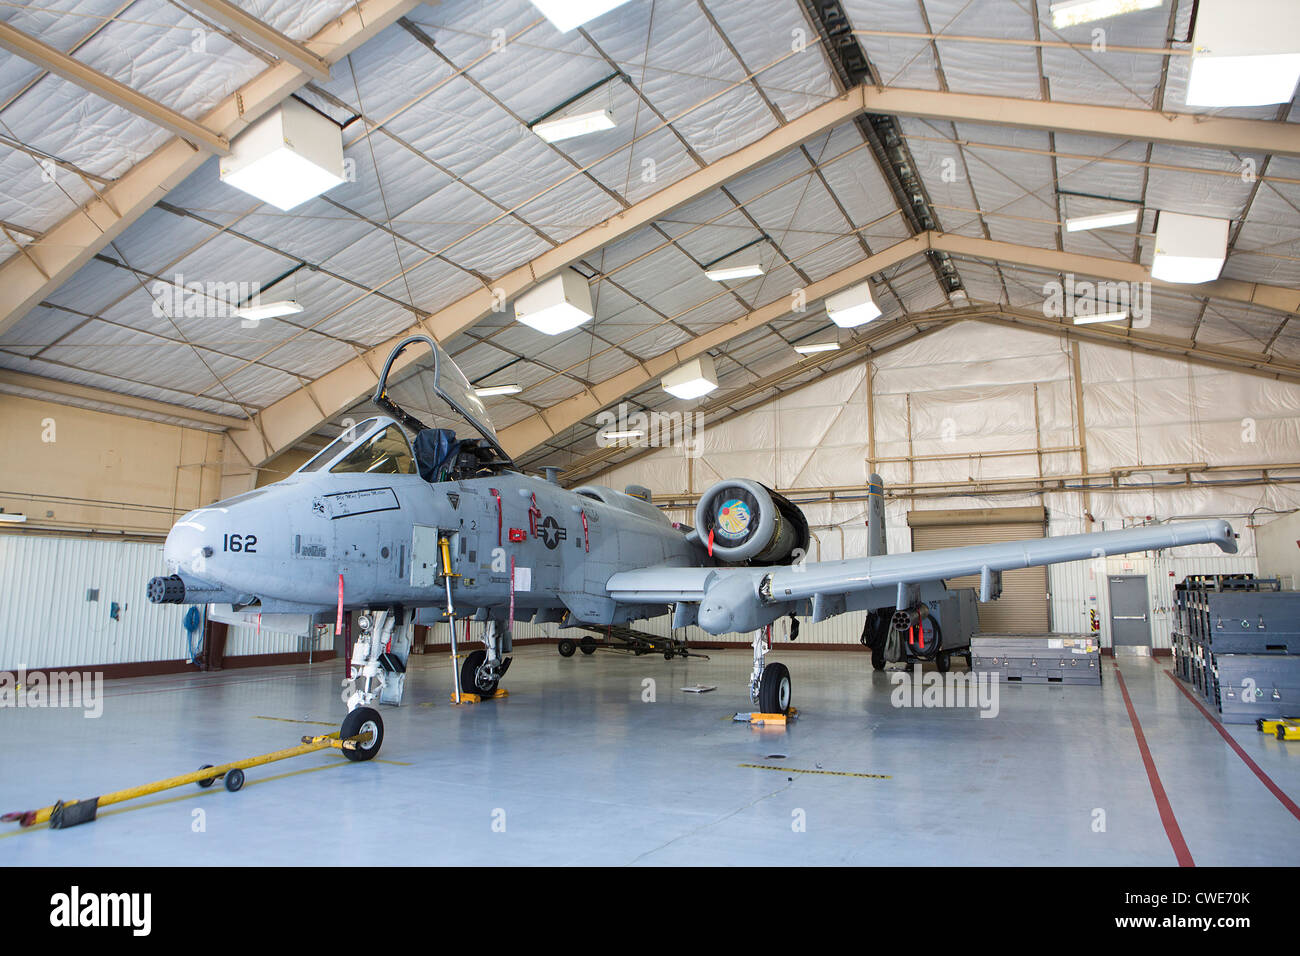 An A-10 Thunderbolt from the 354th Fighter Squadron sits parked in a hangar at Davis-Monthan Air Force Base. Stock Photo